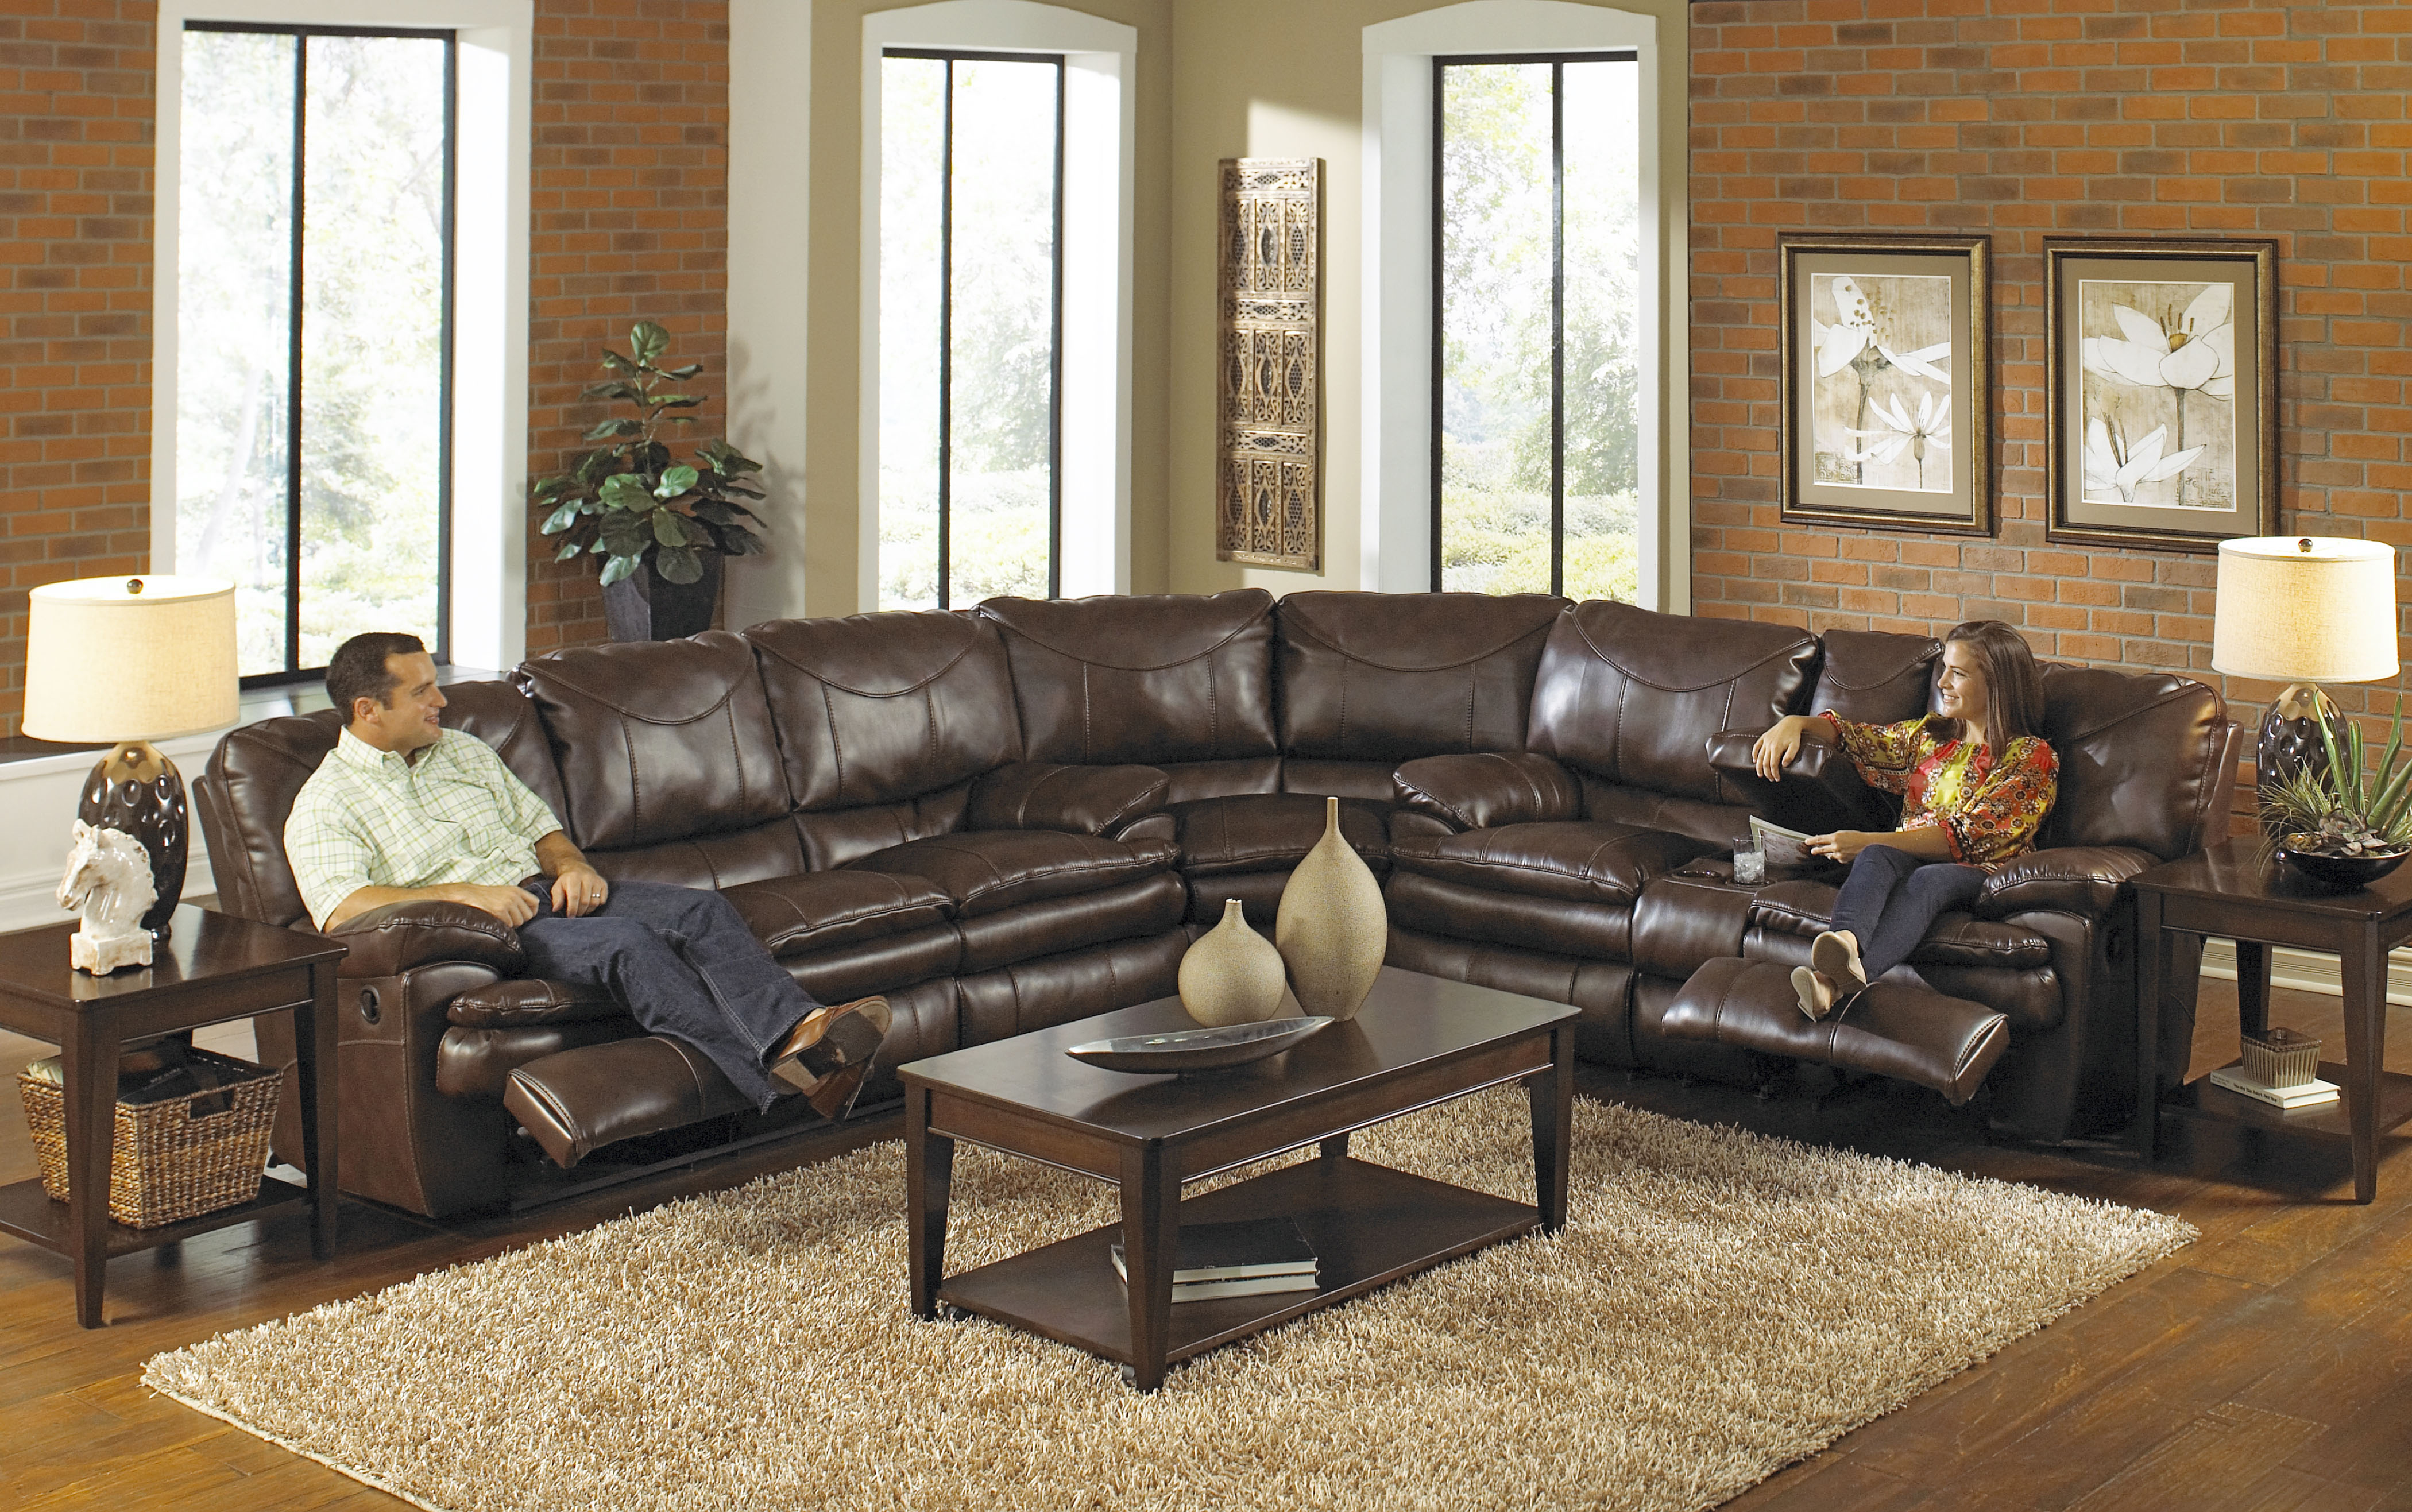 Sectional sofas with loungers - 4 RGJUVQR